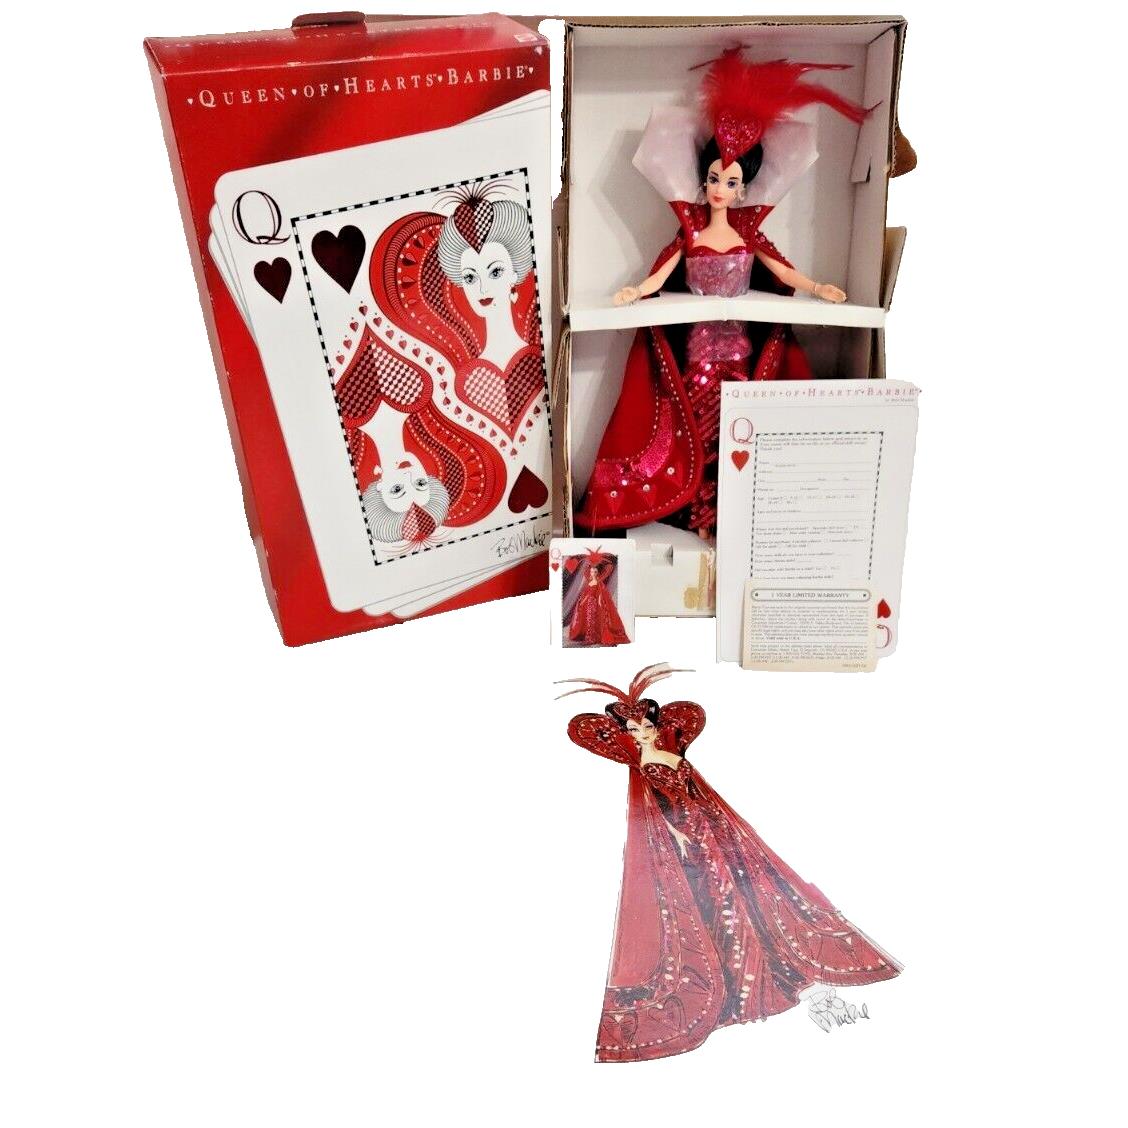 1994 Queen of Hearts Doll 7th in Bob Mackie Barbie Collection 12046